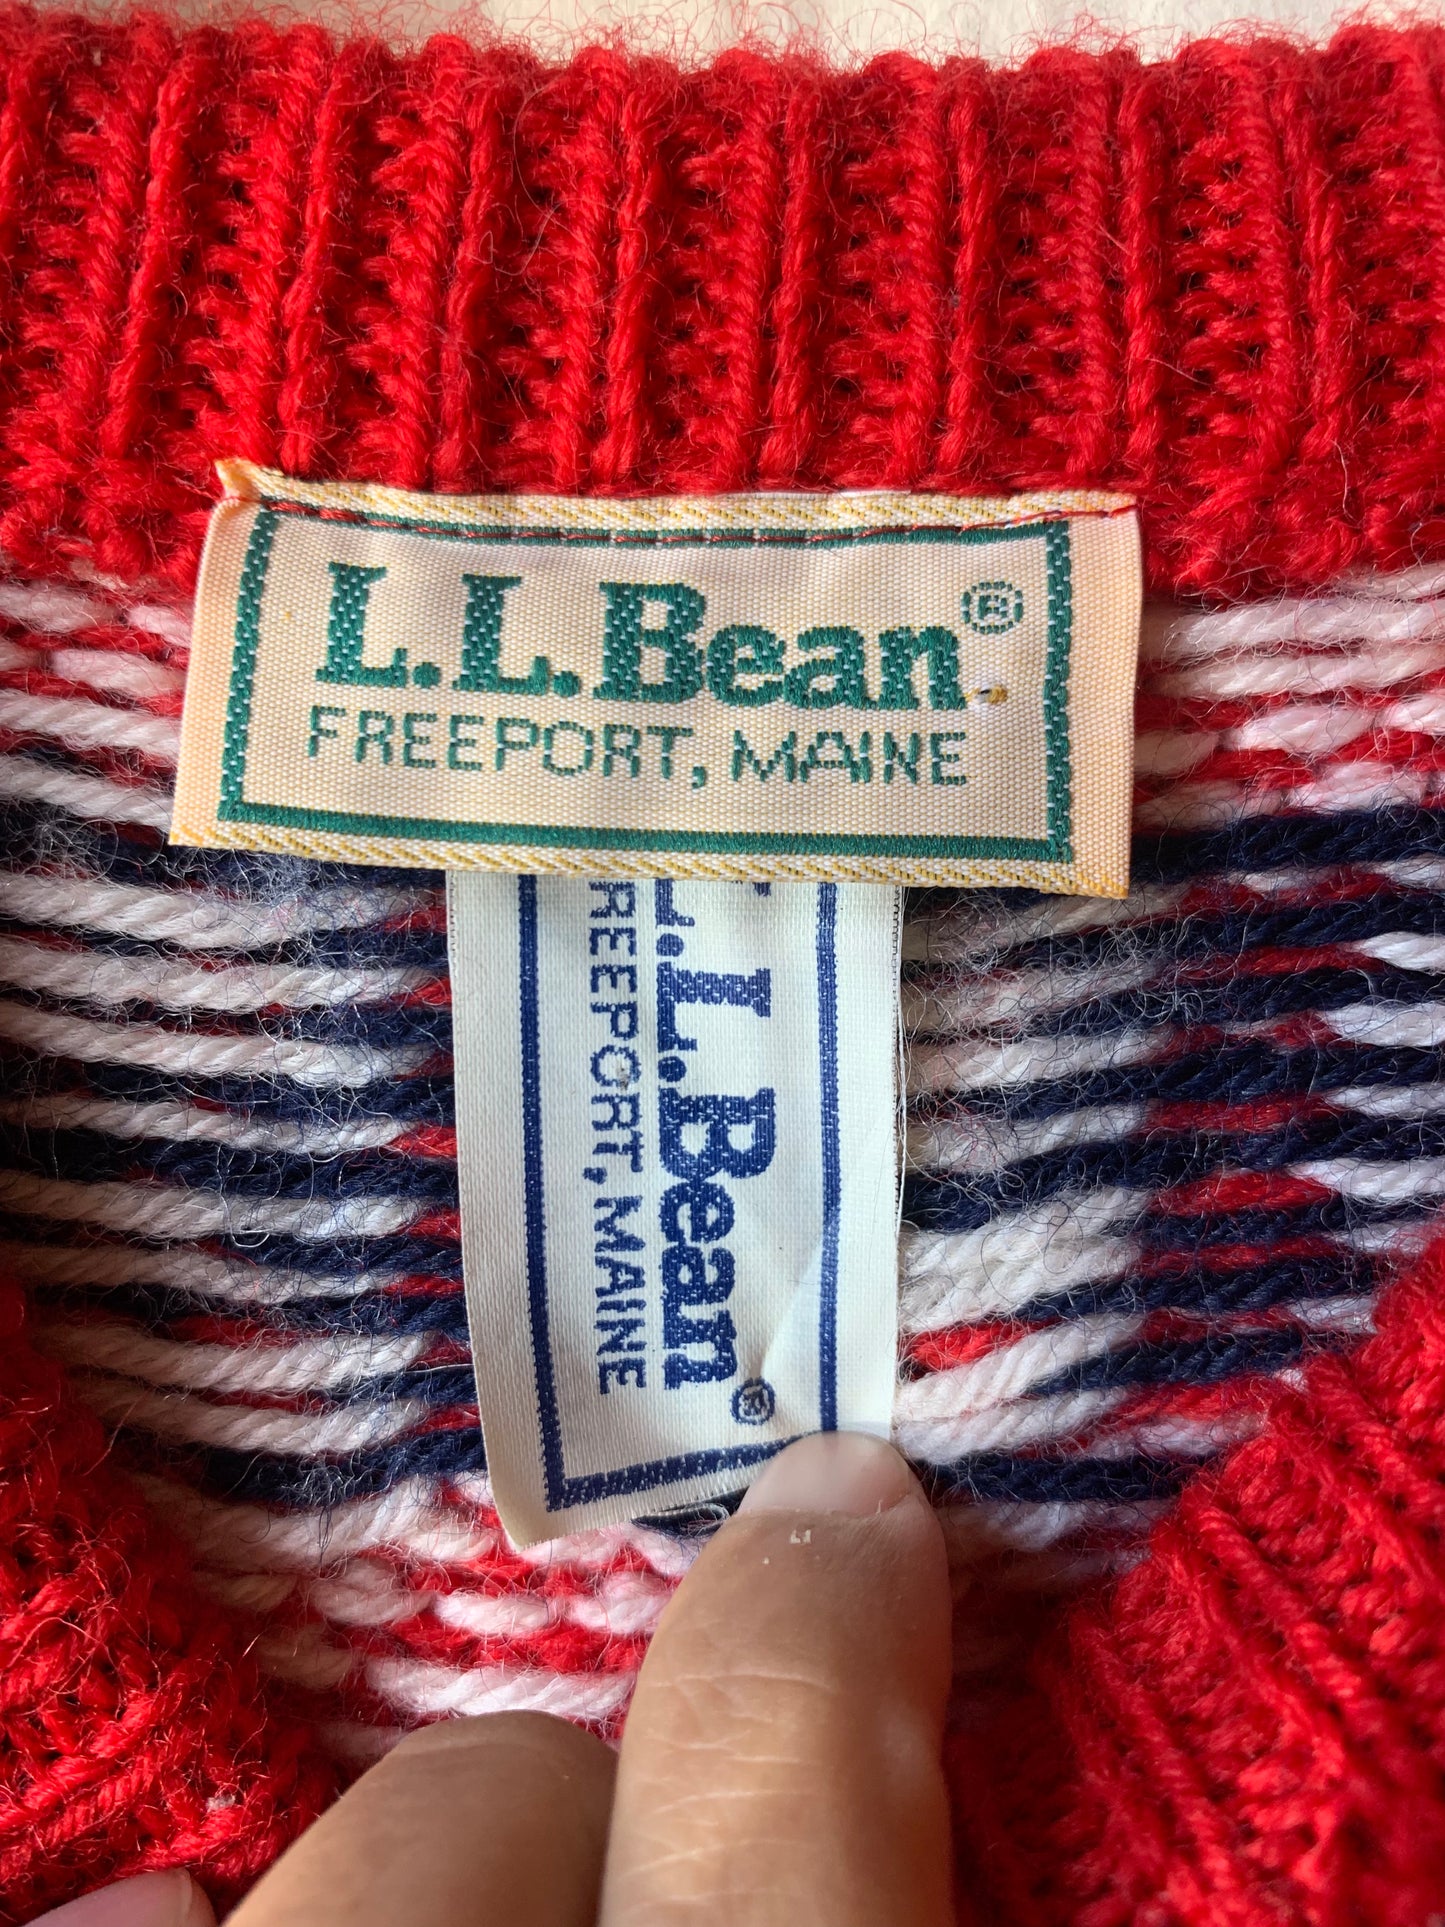 Vintage Red LL Bean Knit Sweater